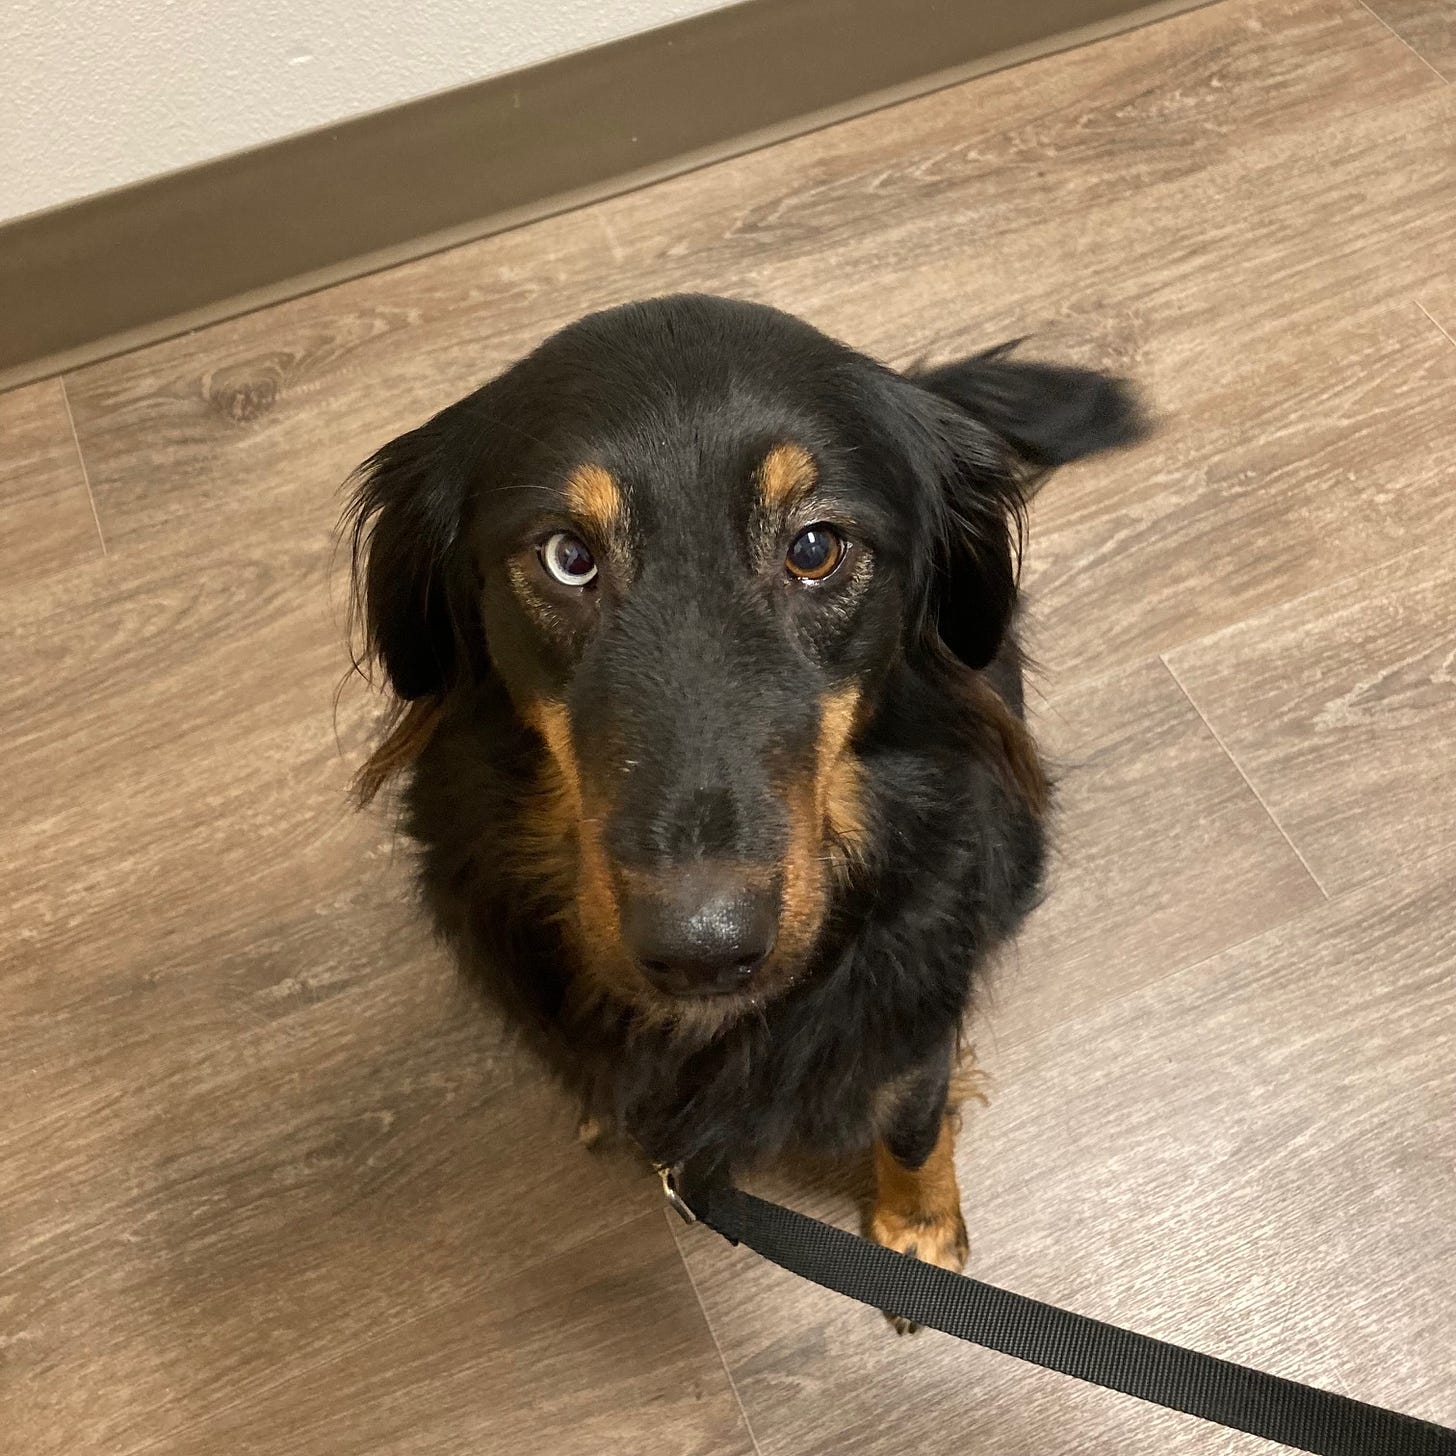 Black and brown dog sitting in vet room looking up at camera